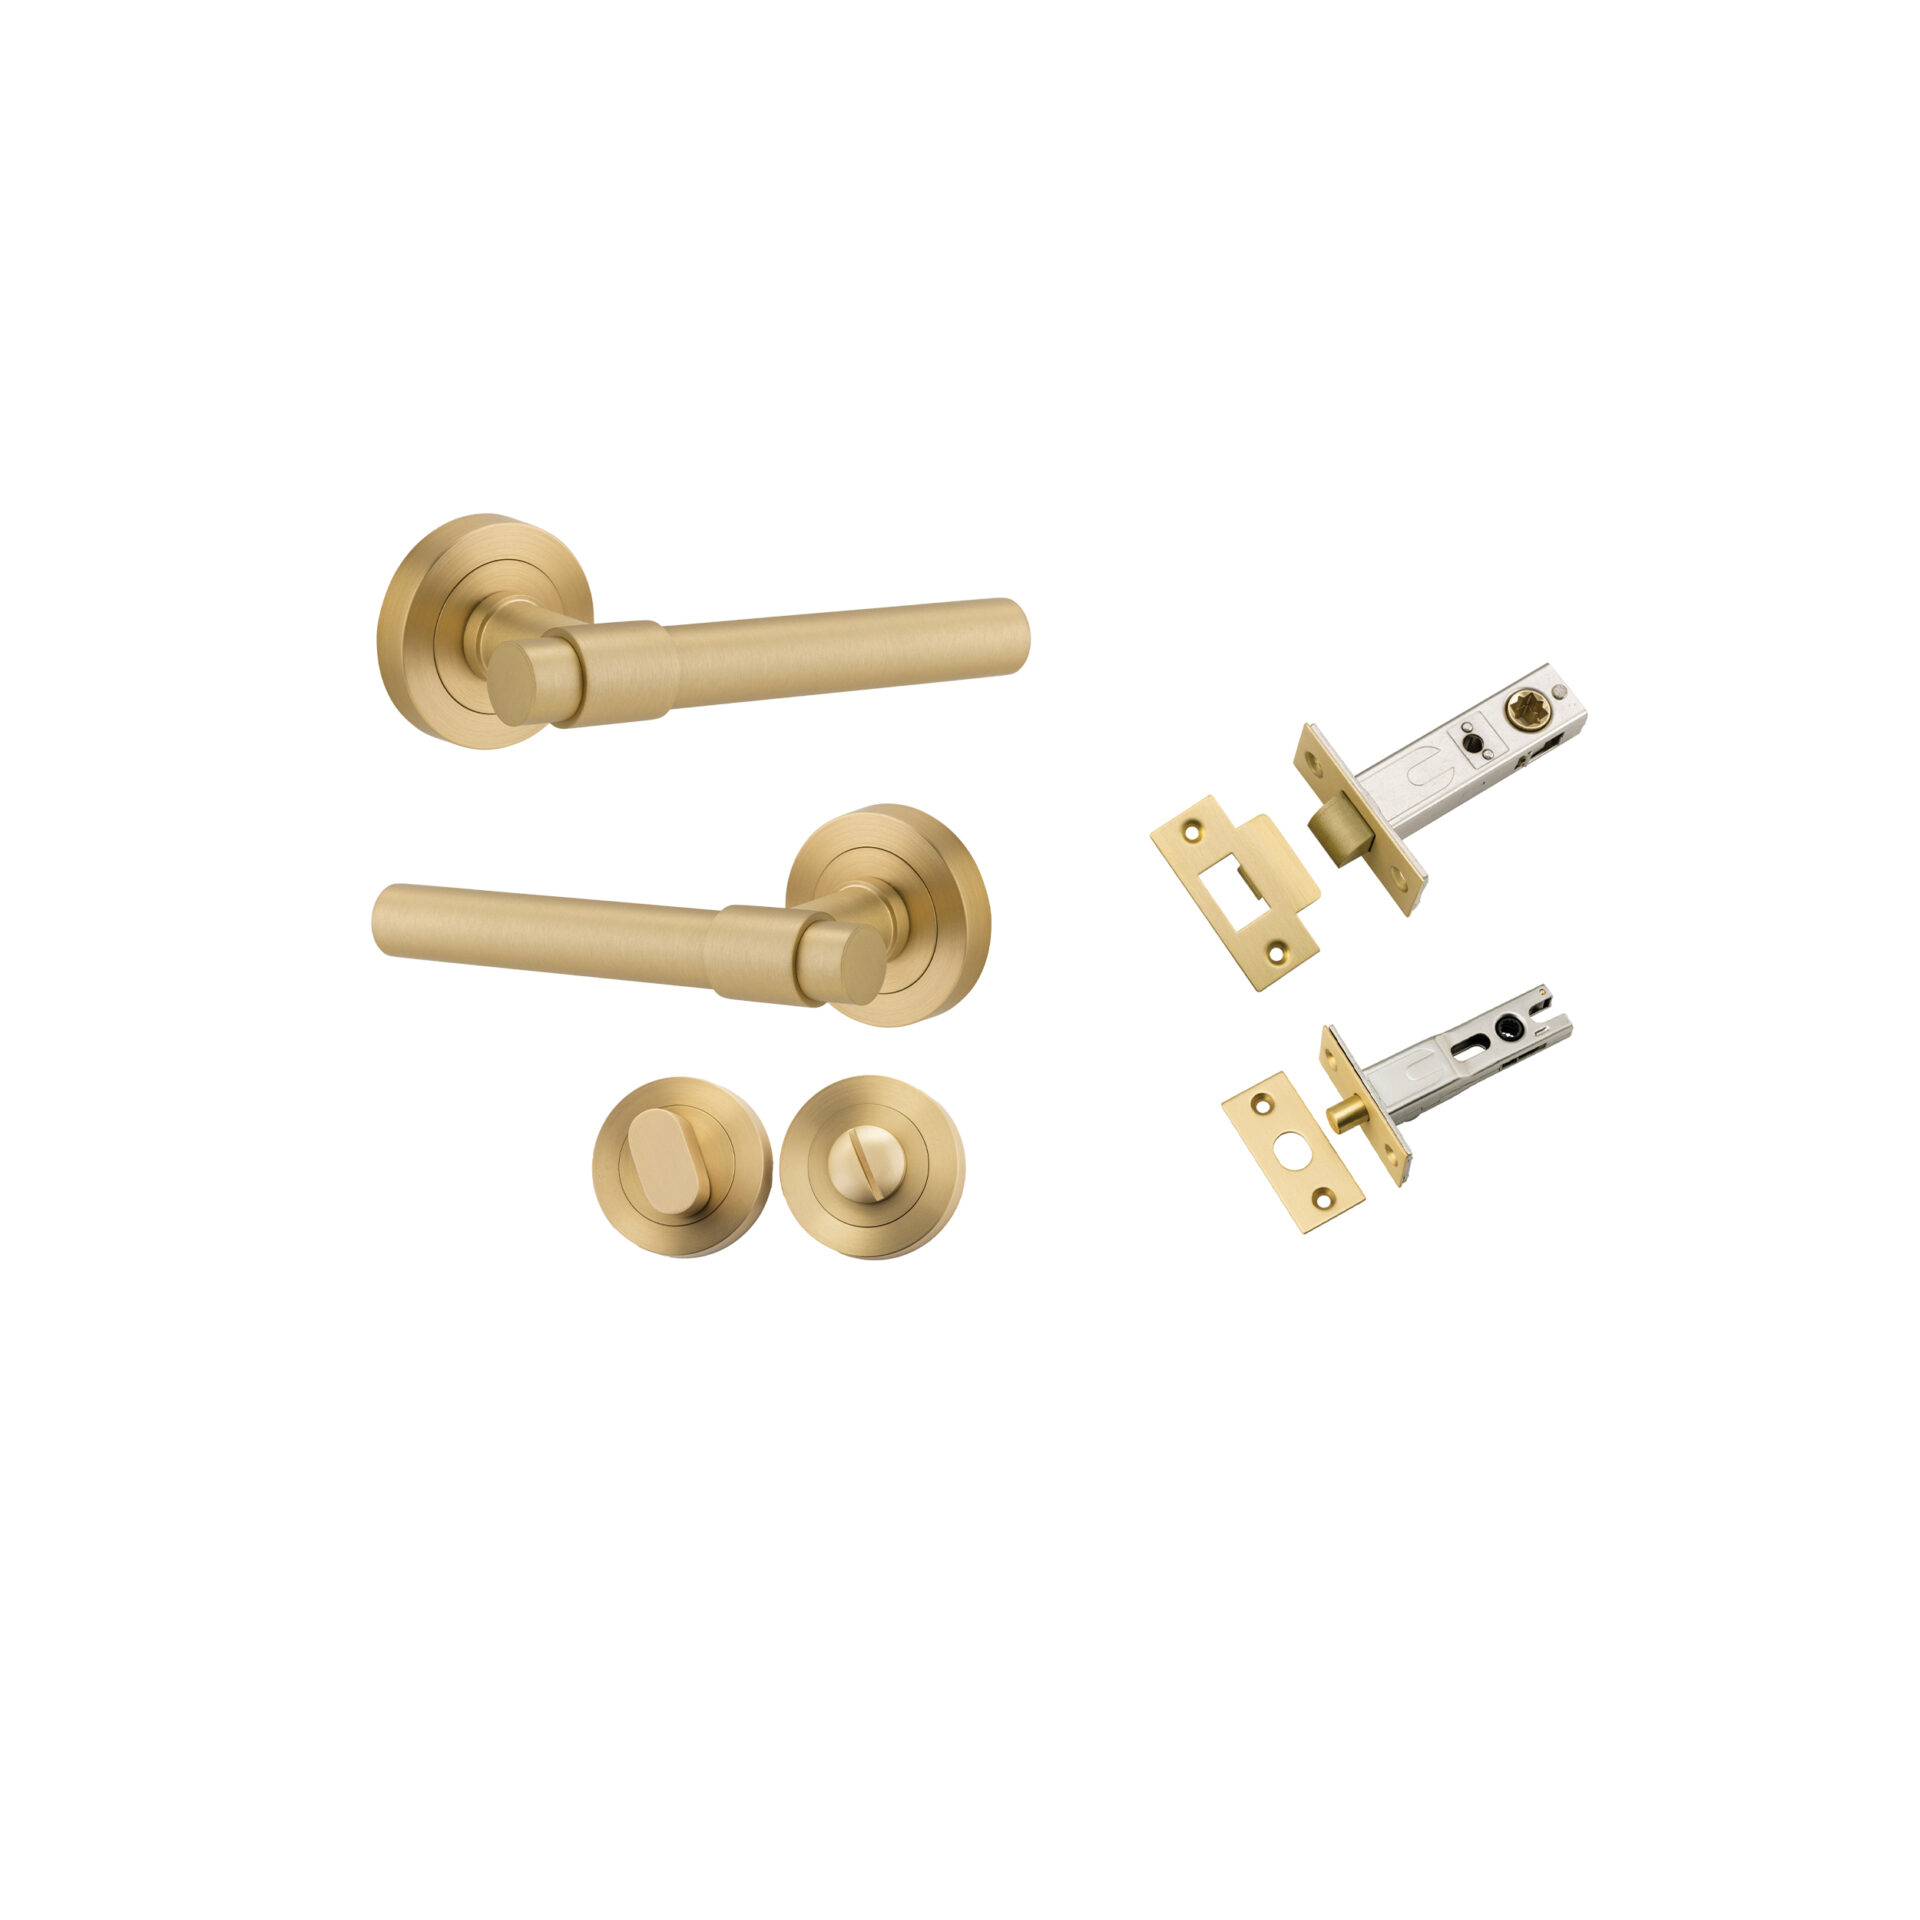 16626KPRIV60 - Helsinki Lever - Round Rose Privacy Kit with Separate Privacy Turn - Brushed Gold PVD - Privacy